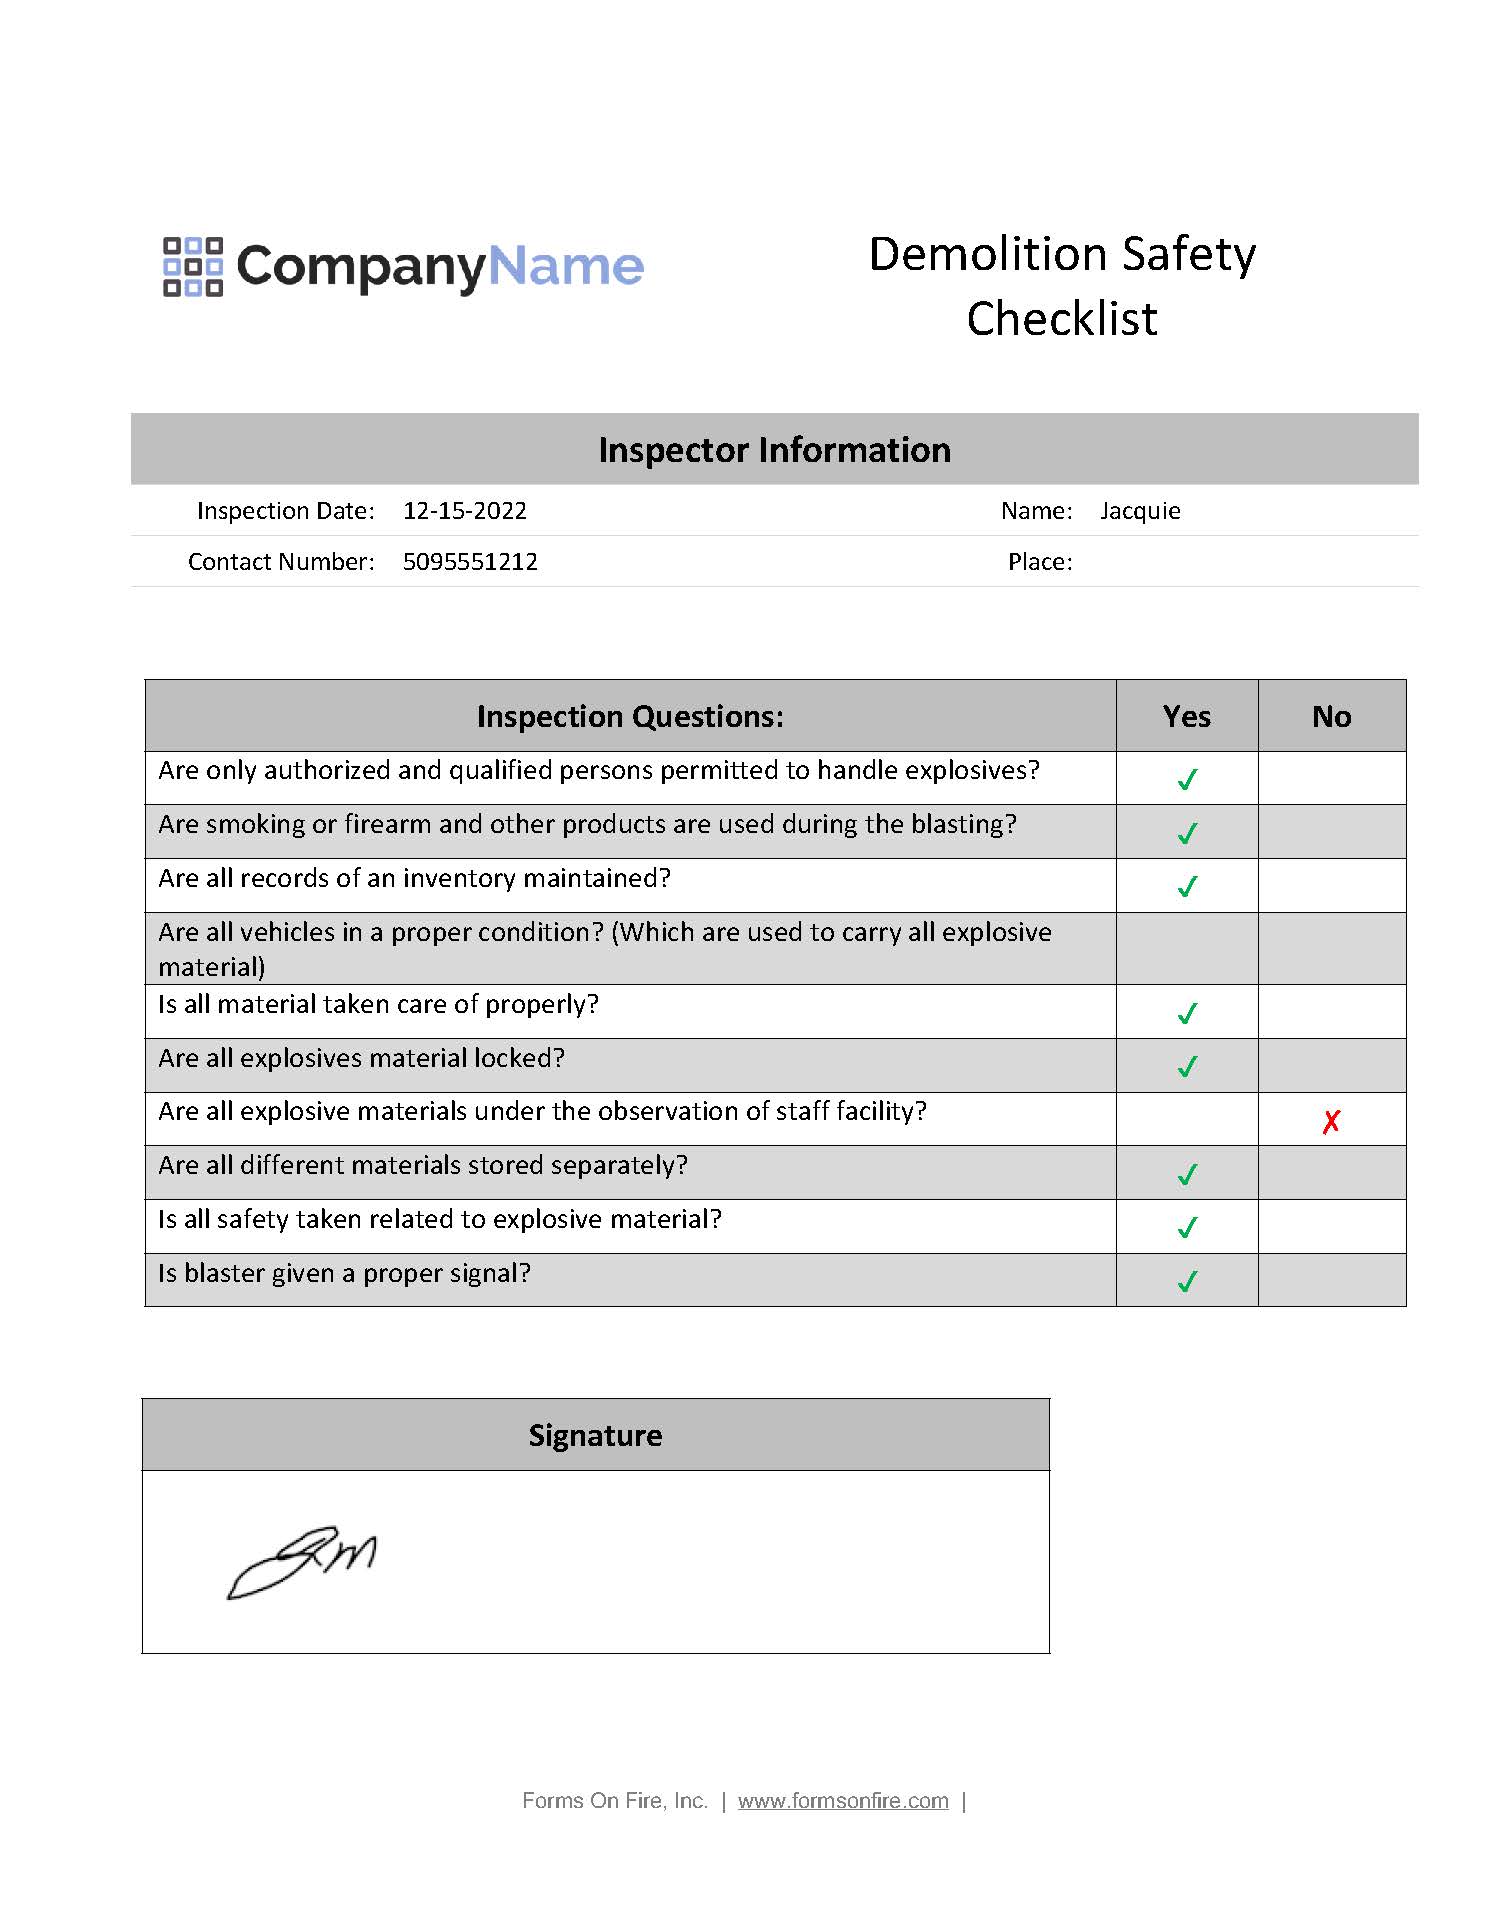 Demolition safety report example.